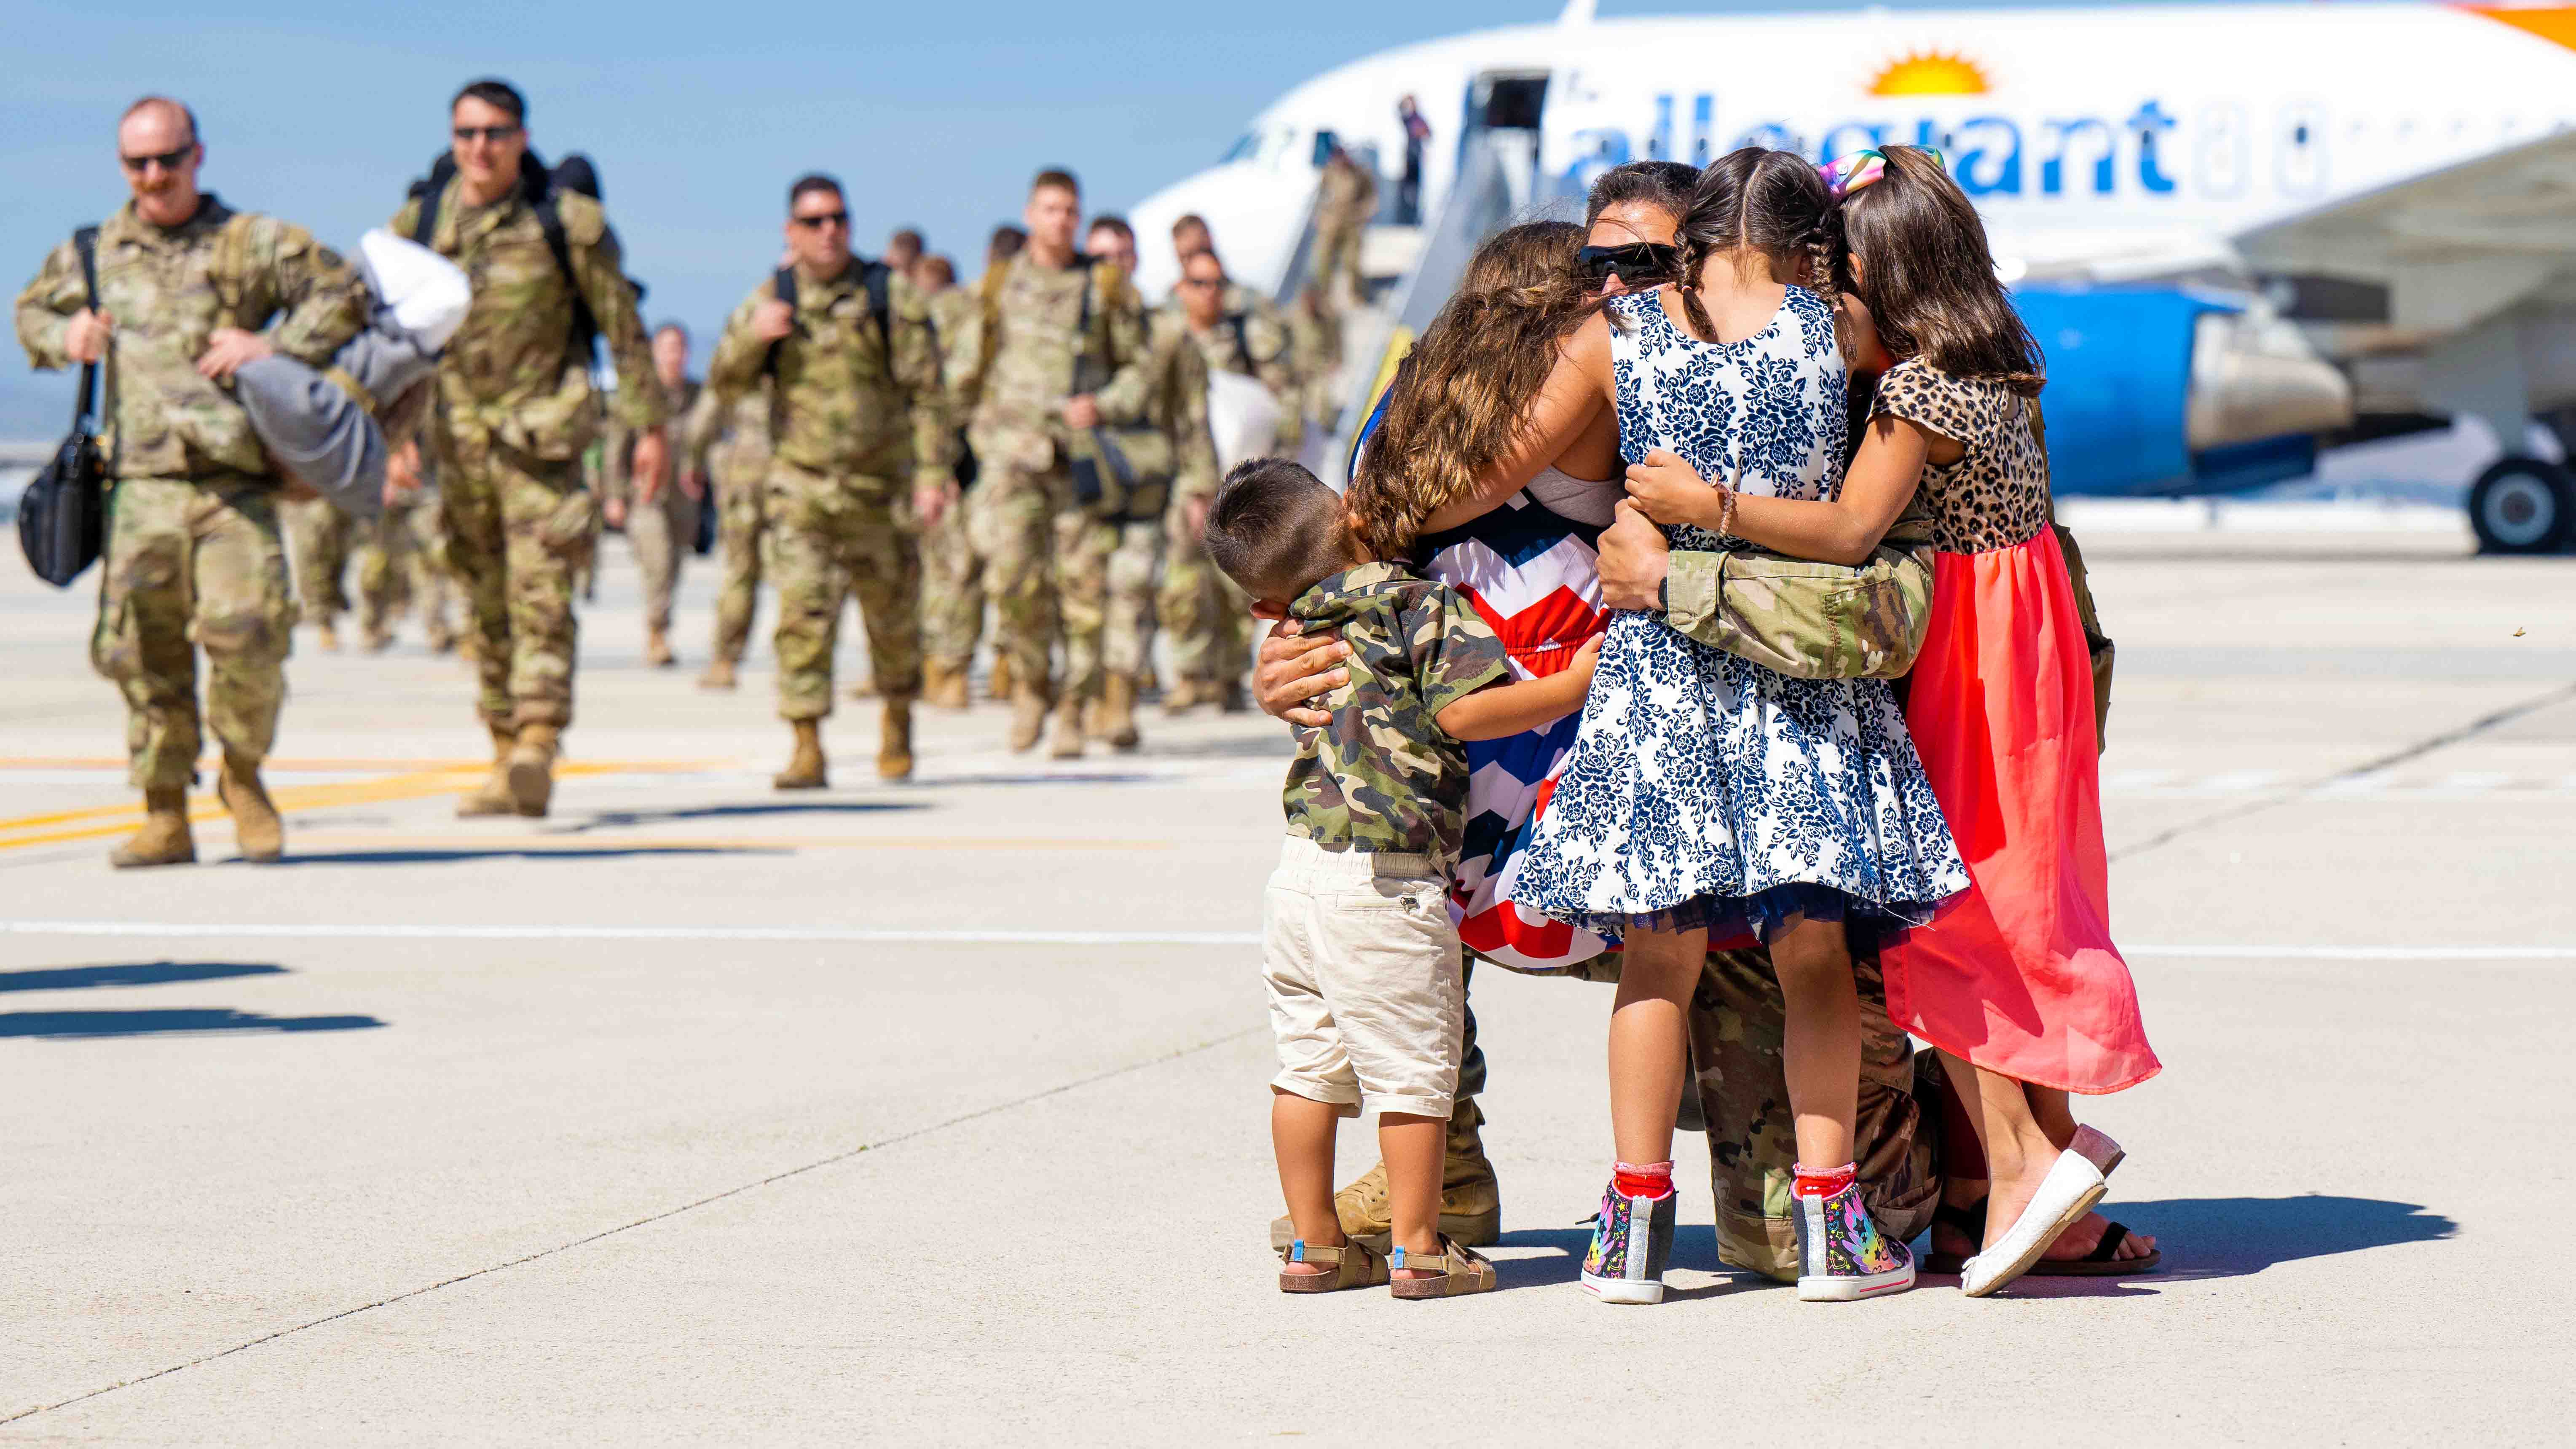 Soldier reunites with family